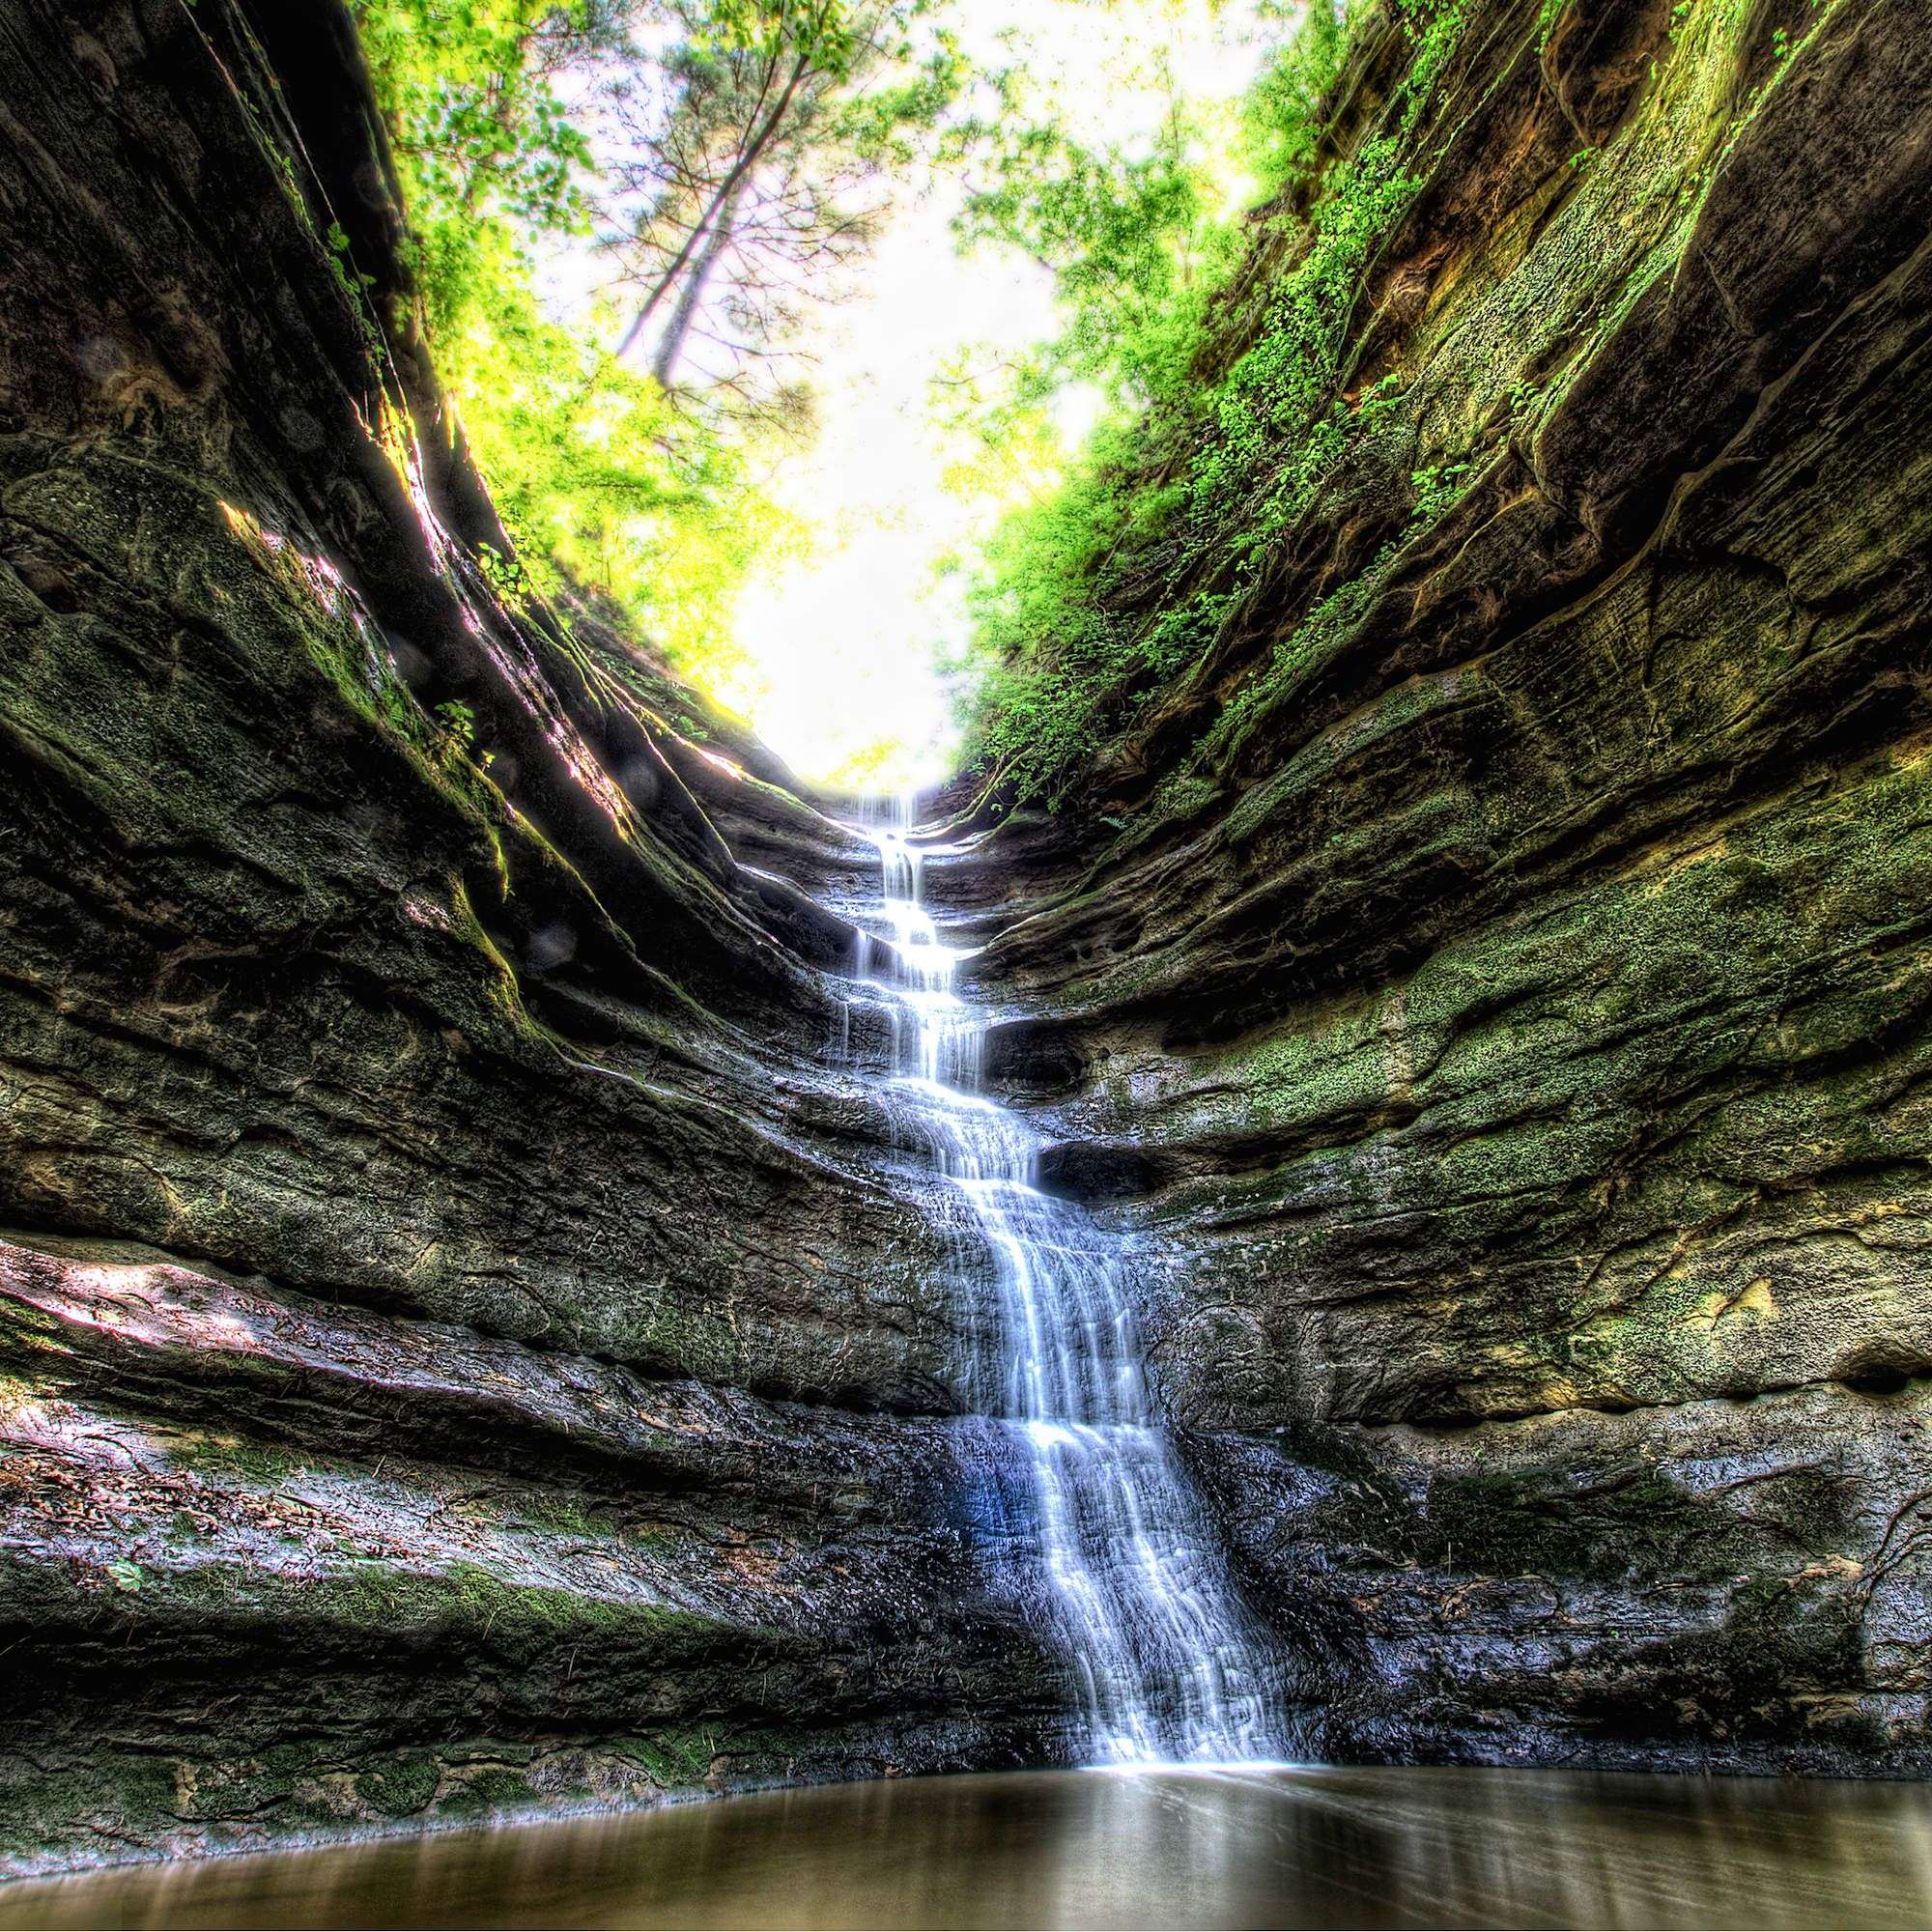 10 Underrated Hikes Near Chicago That We